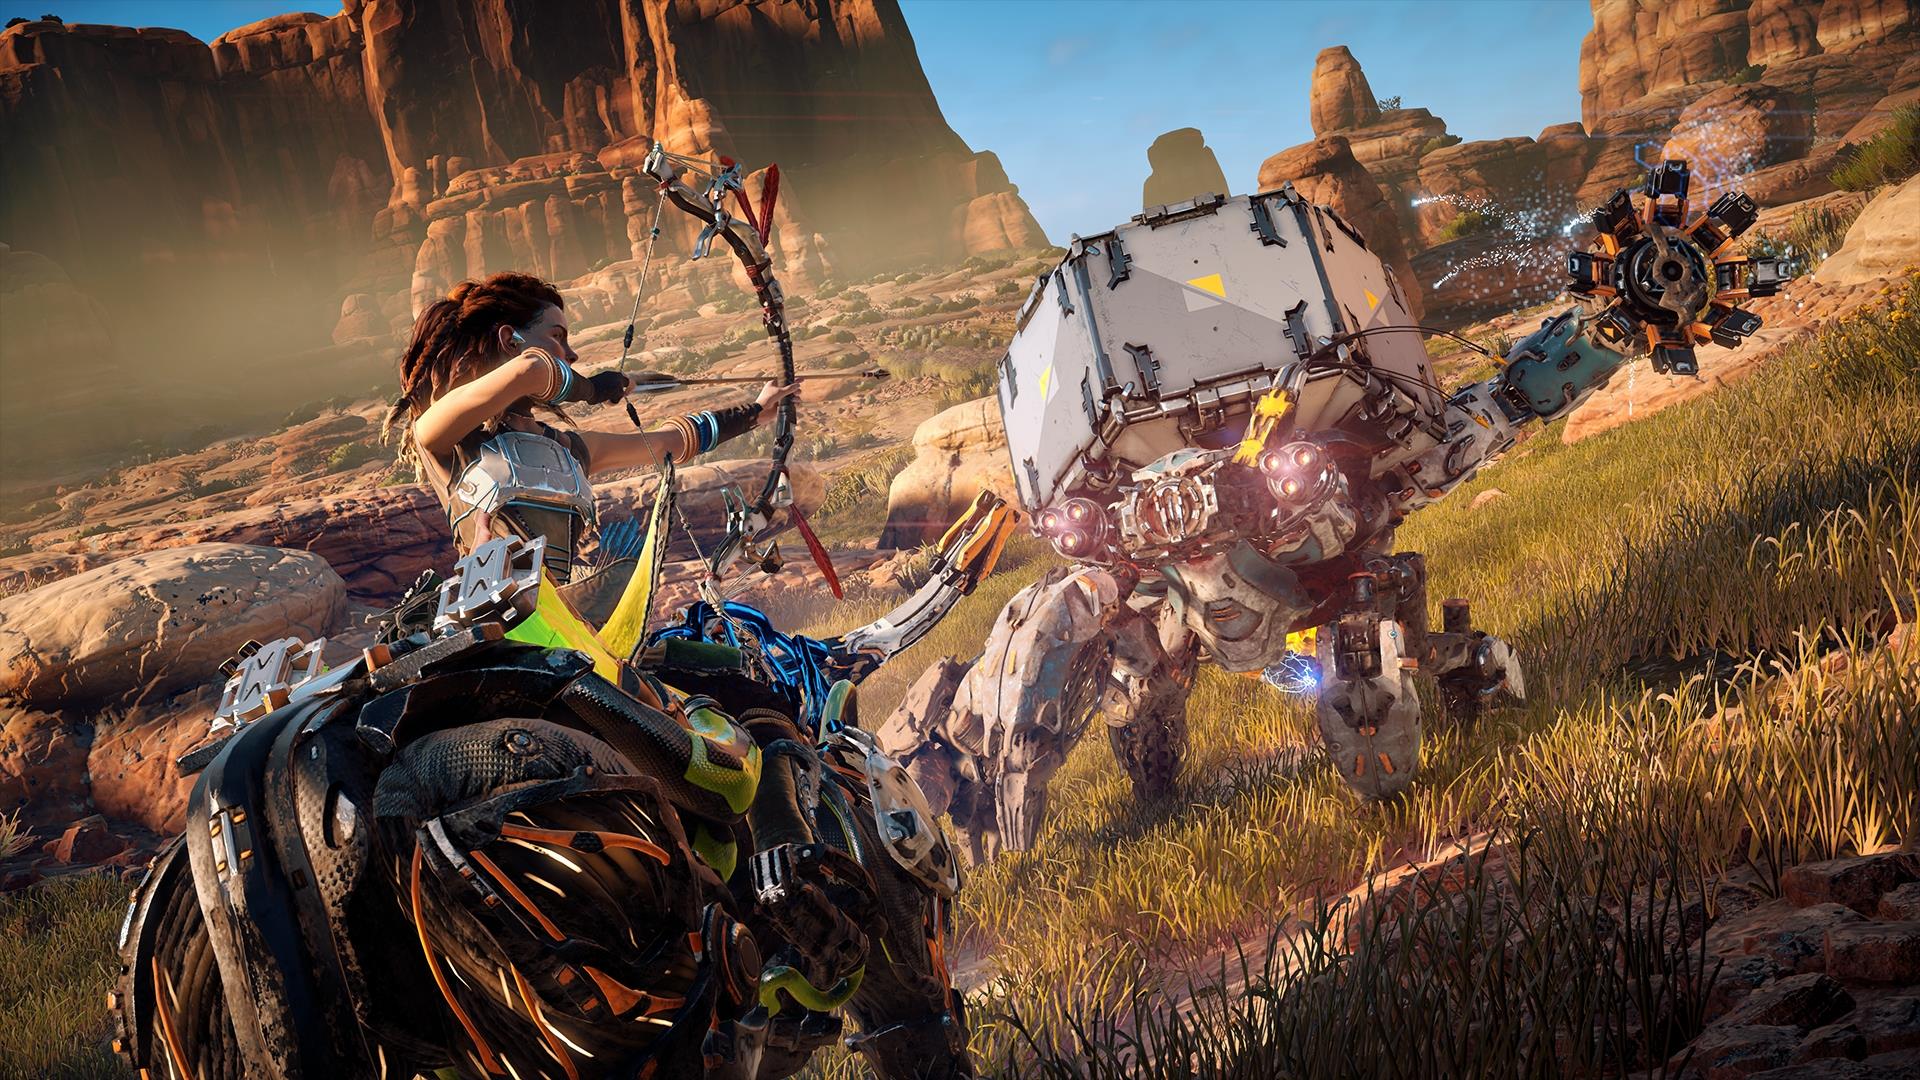 Image for Horizon Zero Dawn expected to sell 4-6 million copies this year alone